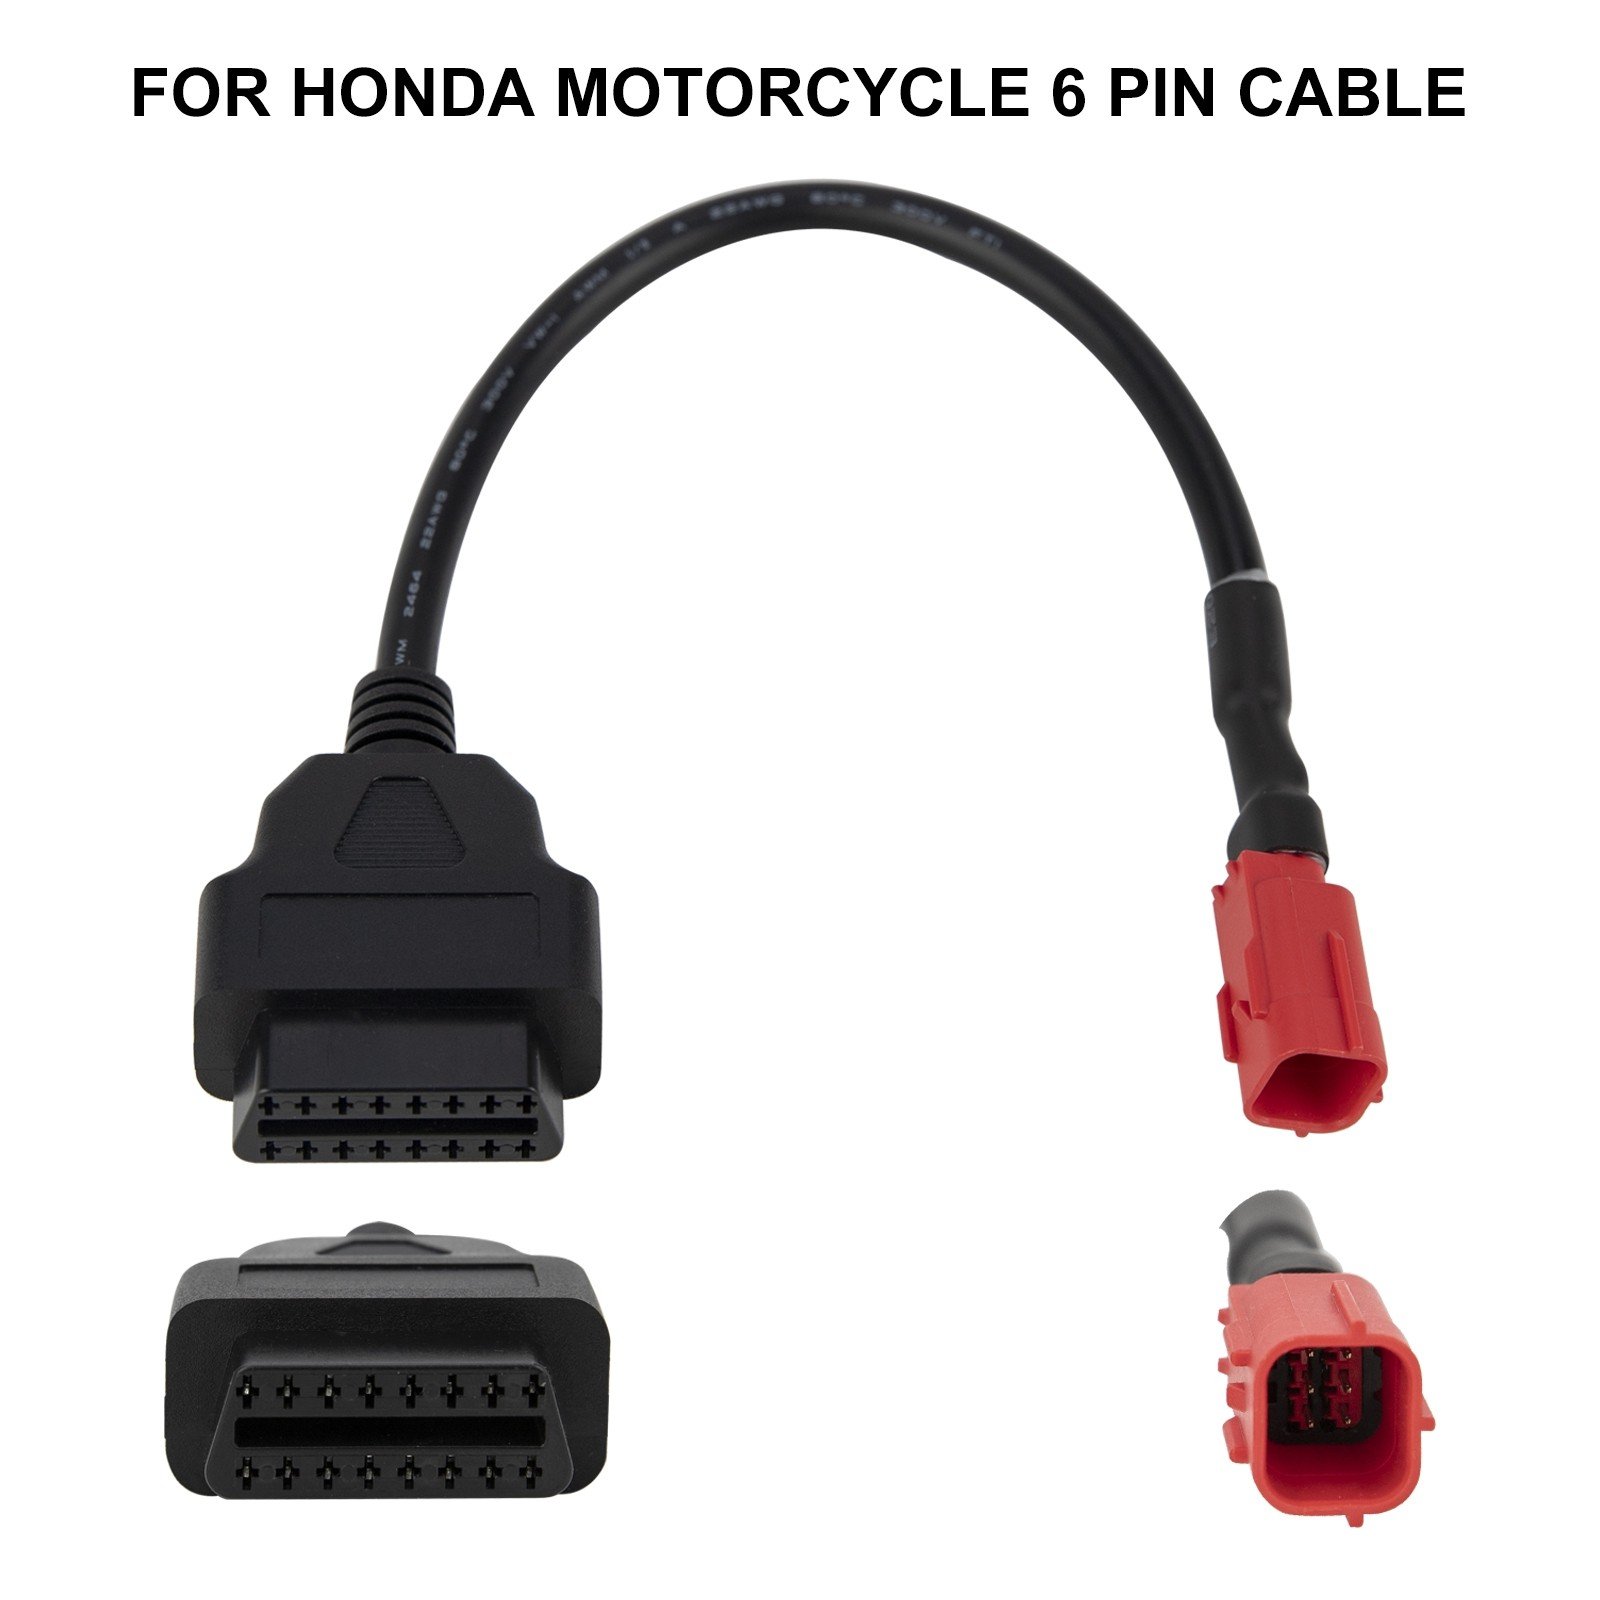 OBD2 Motorcycle Cable For Honda 6 Pin Plug Diagnostic Cable to 16